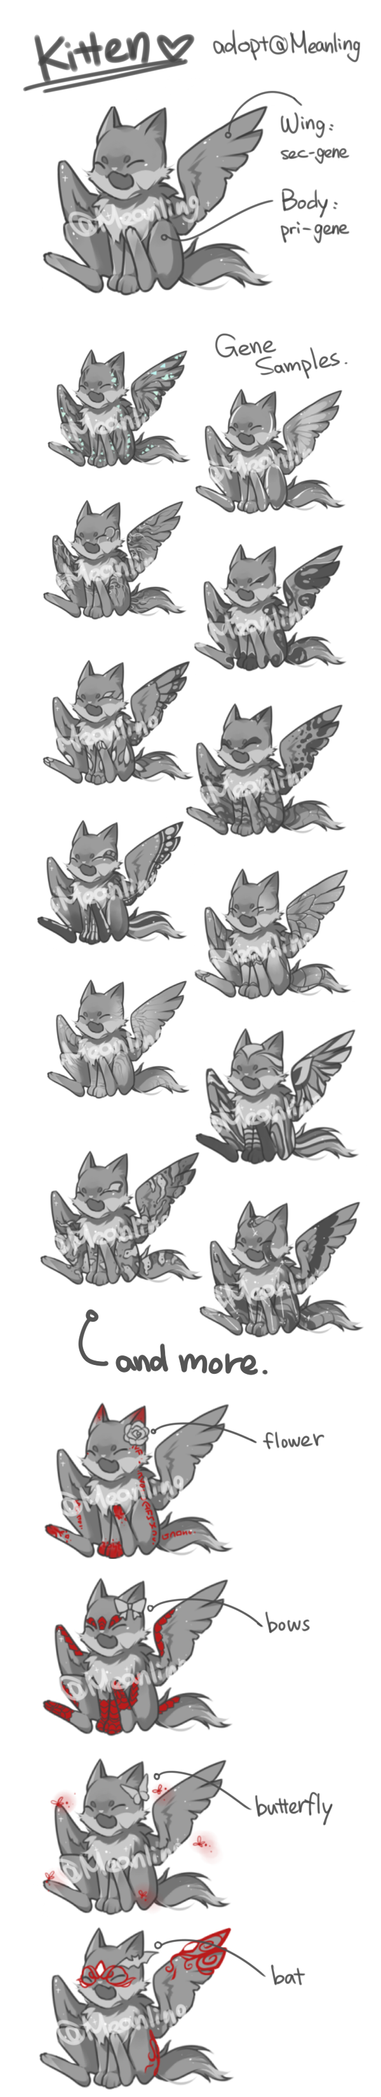 kitten_adopt_base_by_frmeanling-dcp2ky7.png